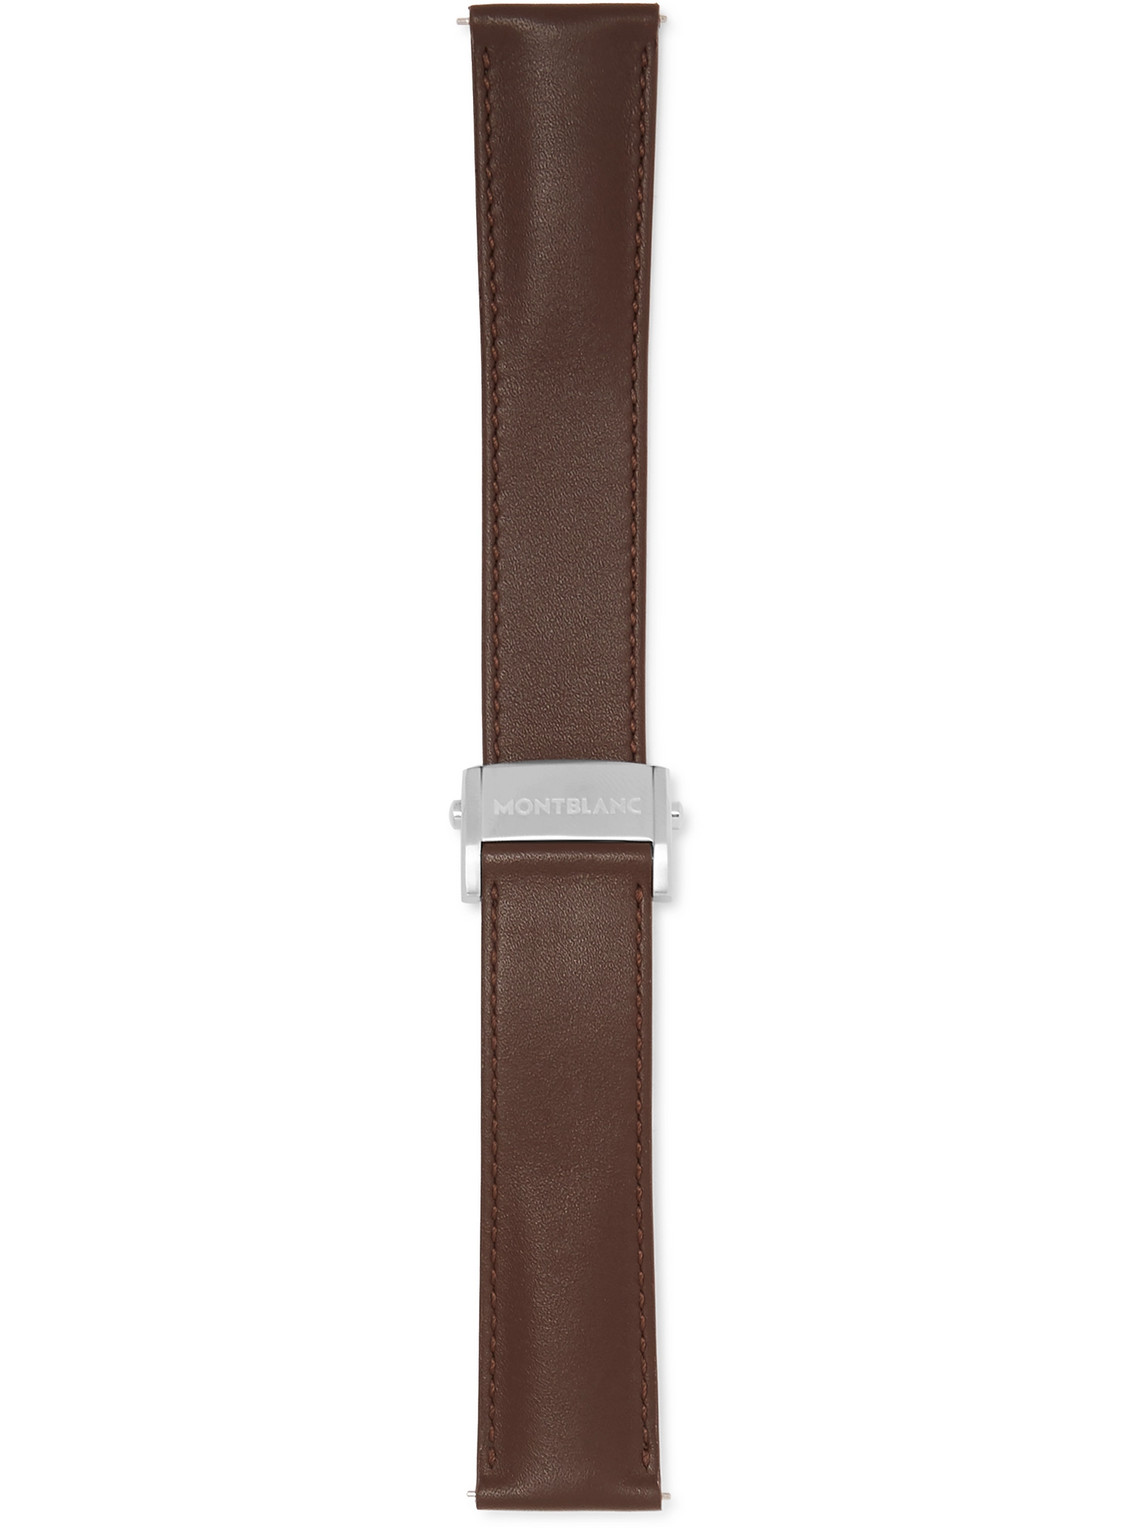 MONTBLANC LEATHER WATCH STRAP